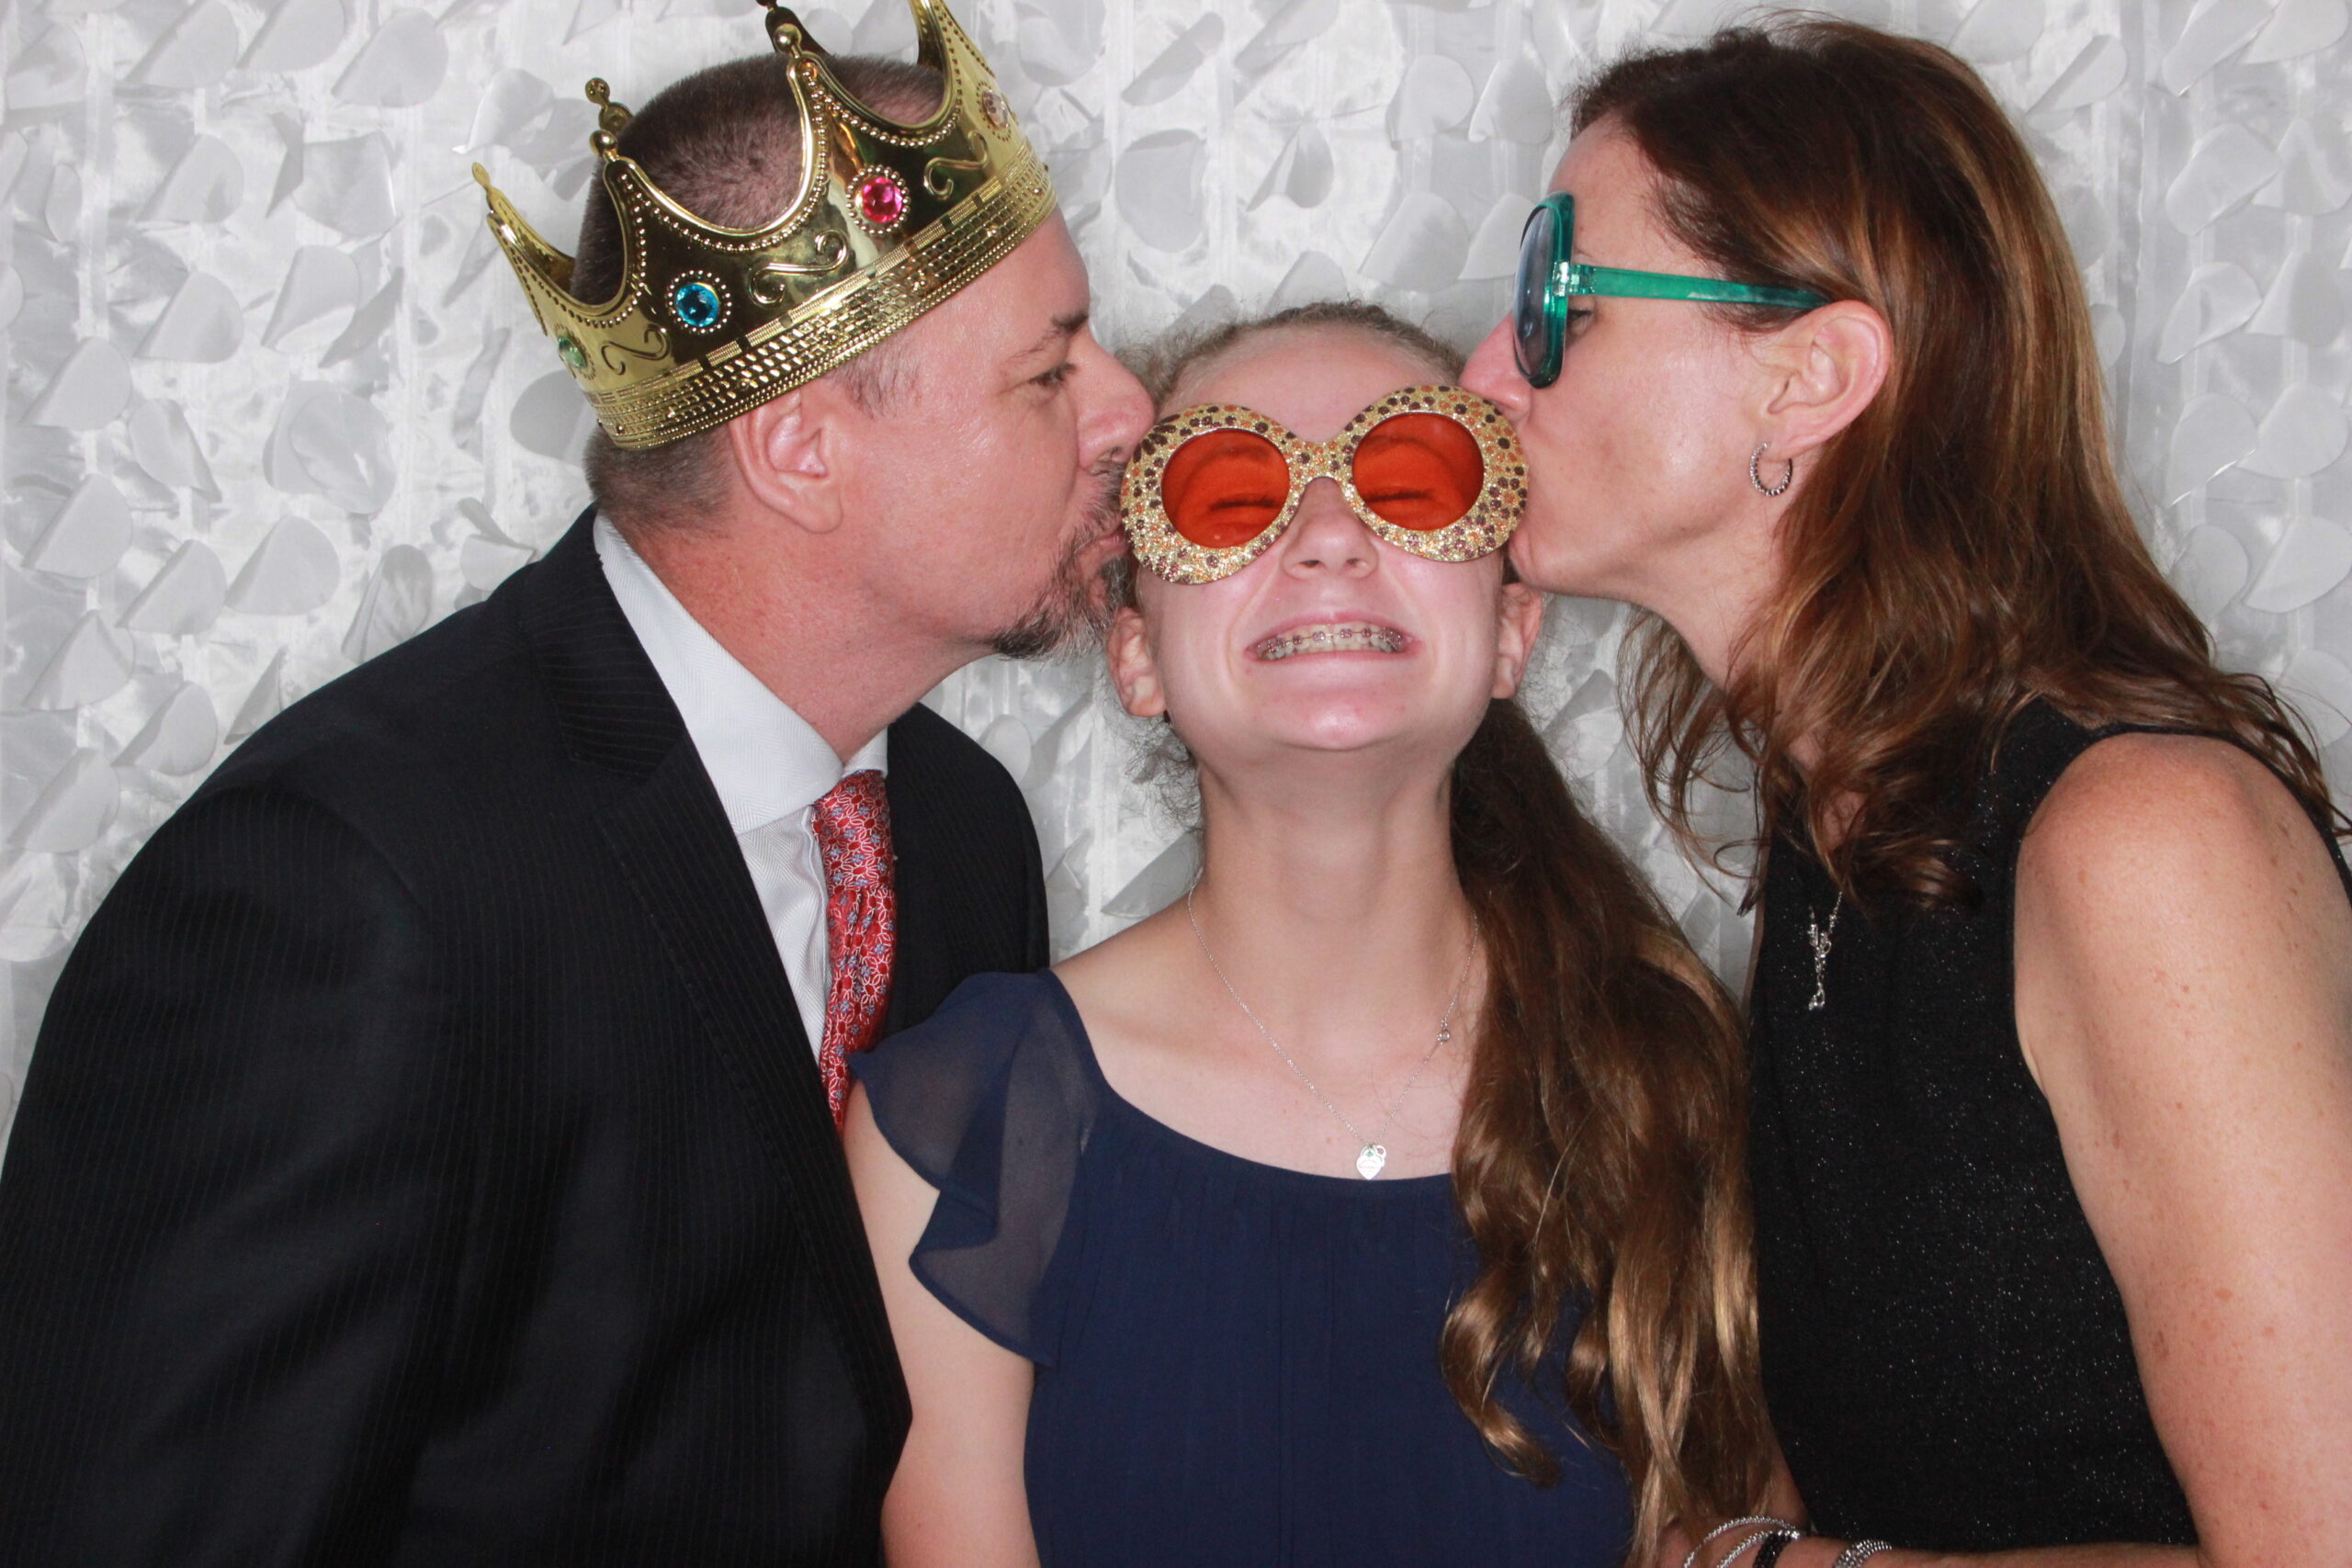 parents kissing their daughter on both sides of her head while wearing photo booth props